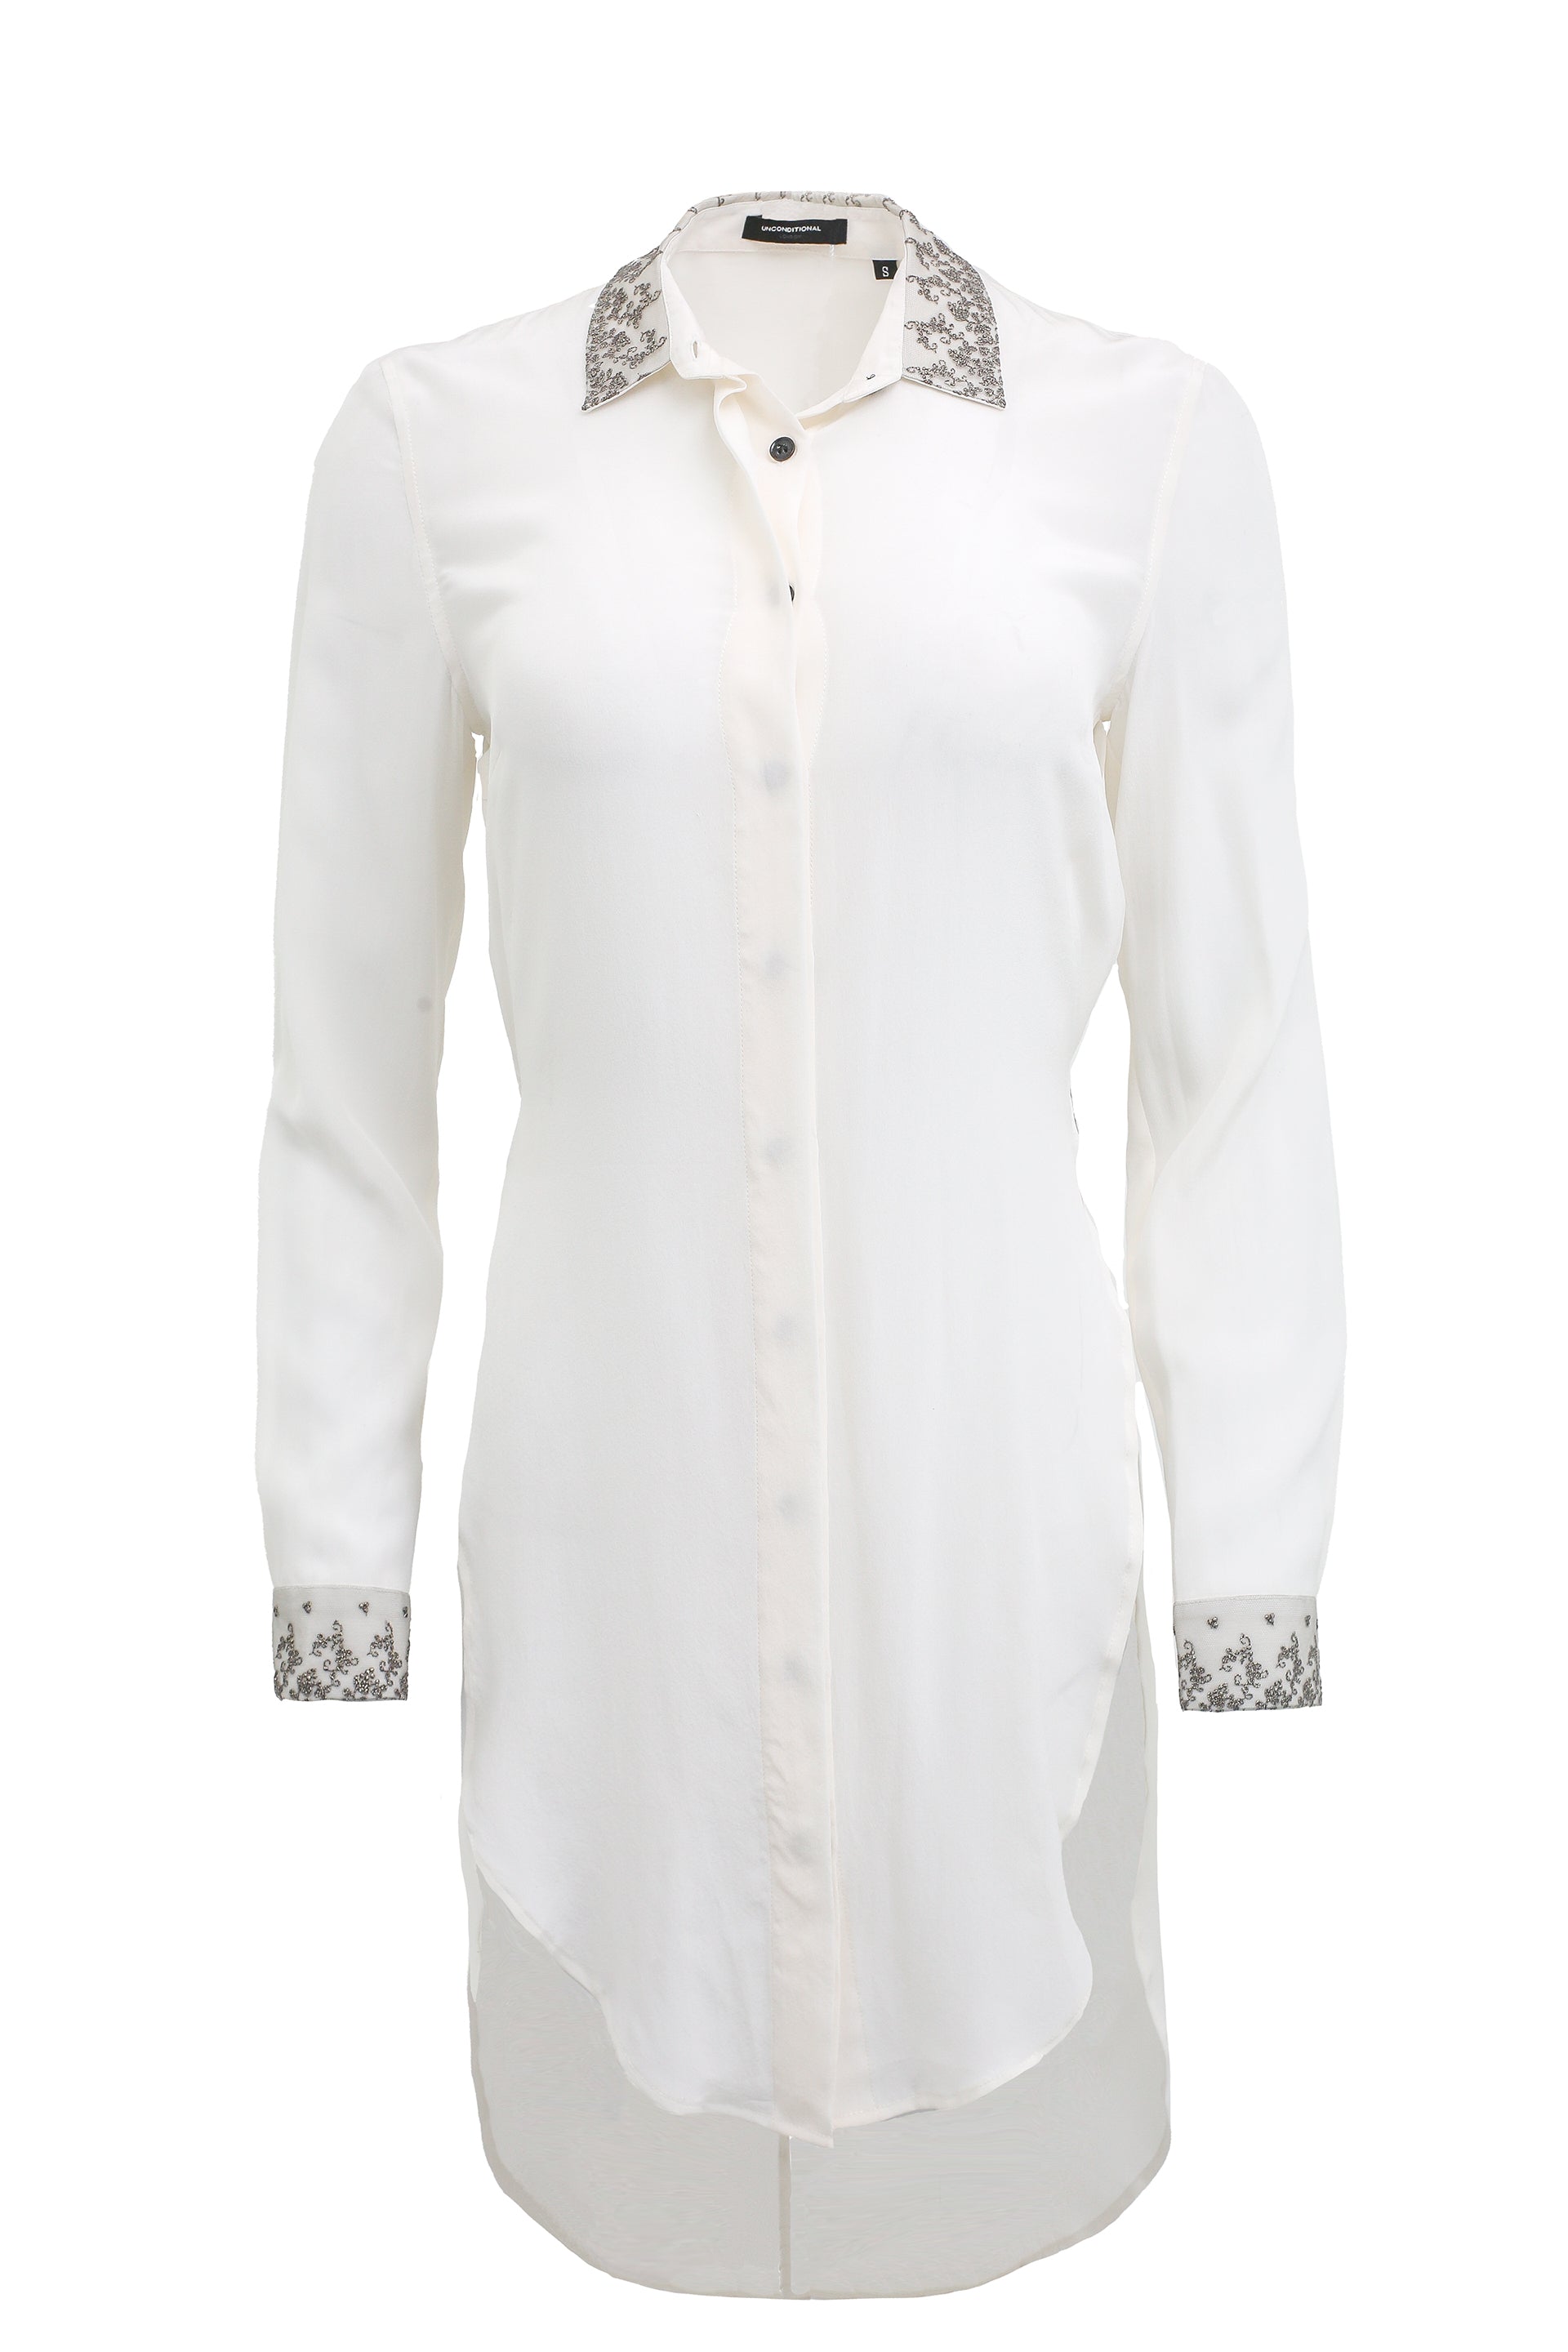 WHITE LONG SLEEVE SHIRT WITH LACE DETAILS